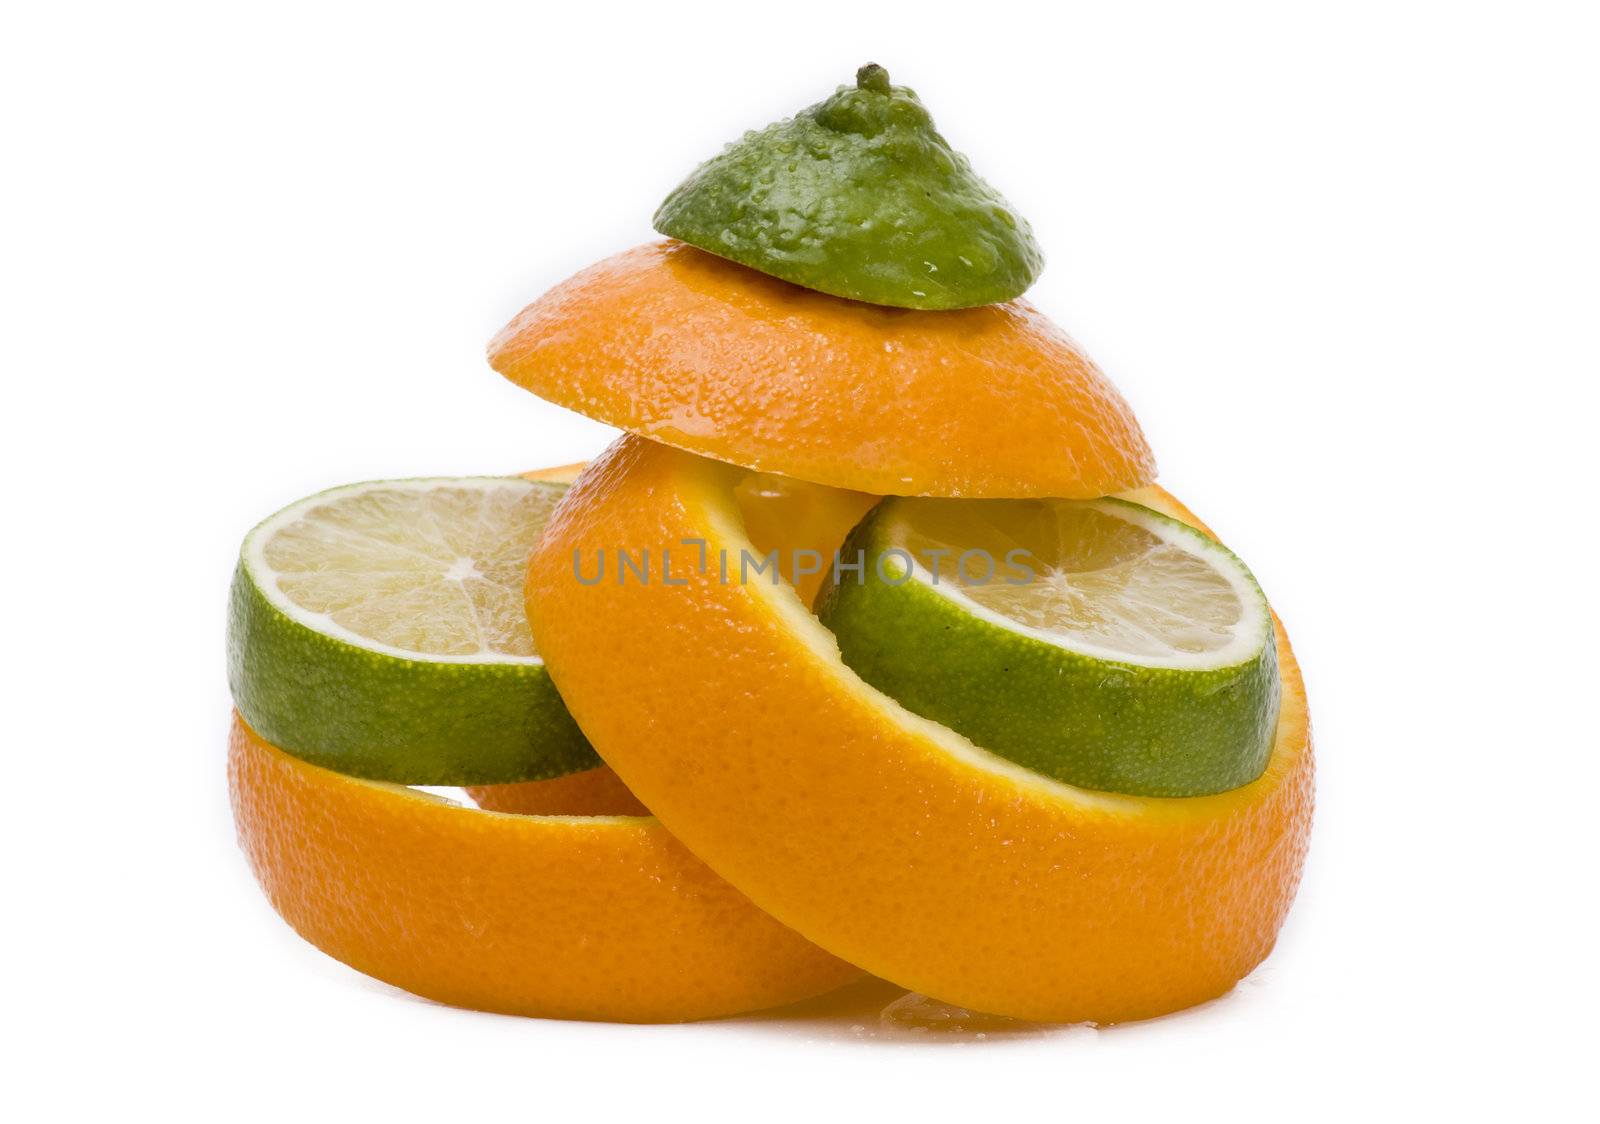 Lime slices in orange peels on white background - isolated